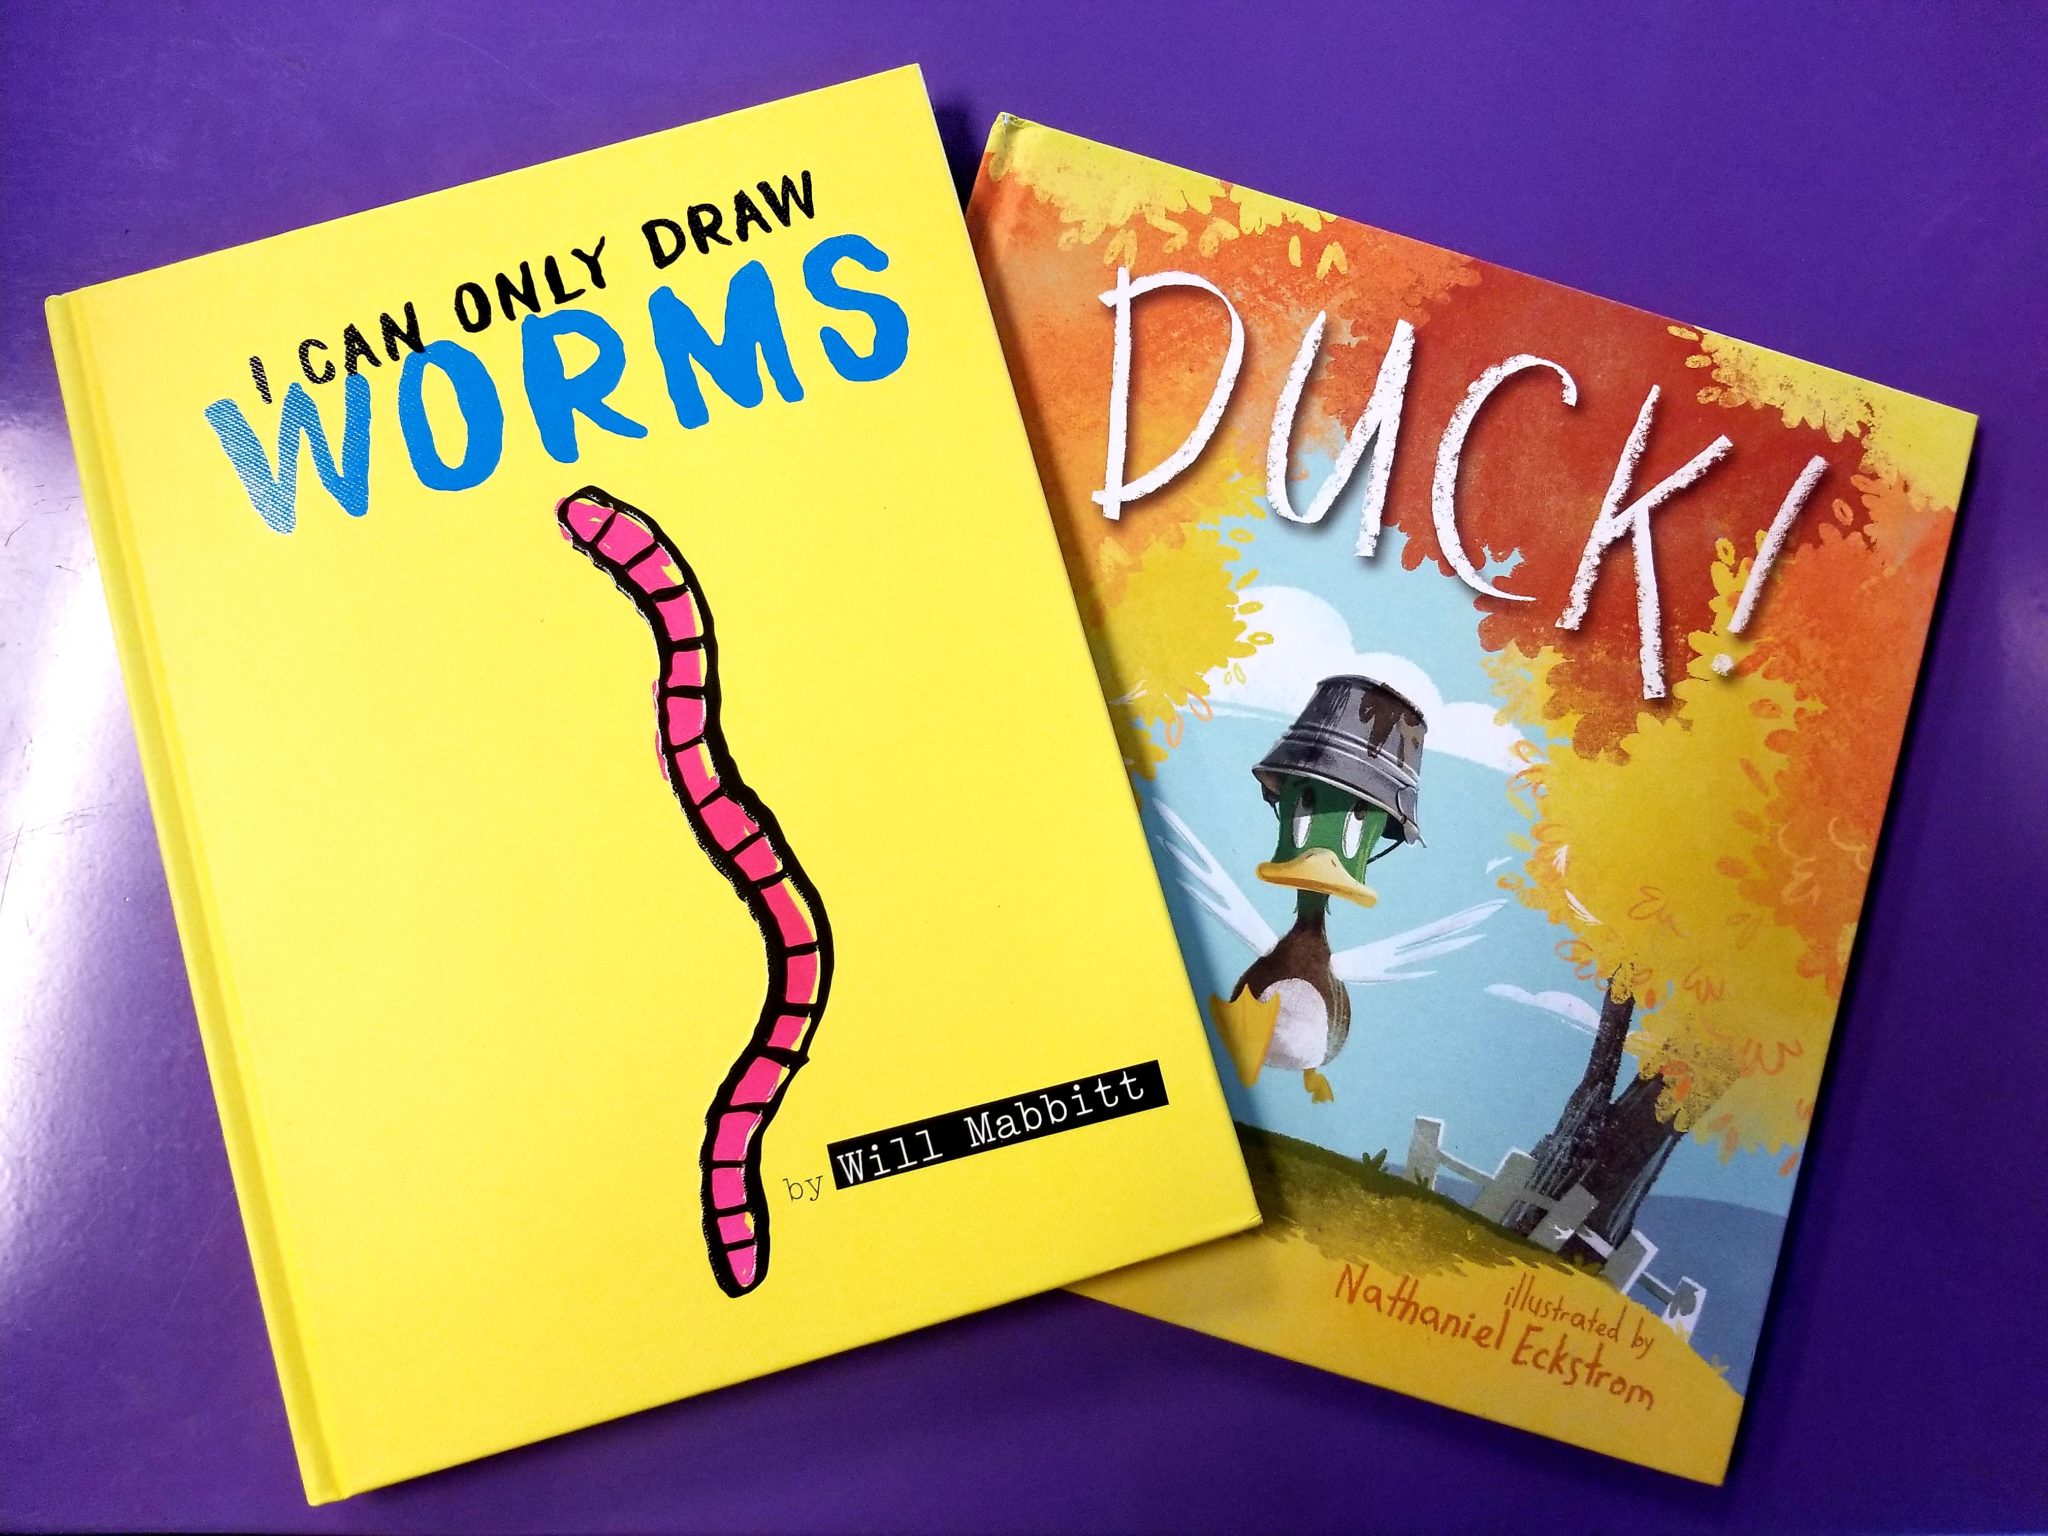 I Can Only Draw Worms & Duck